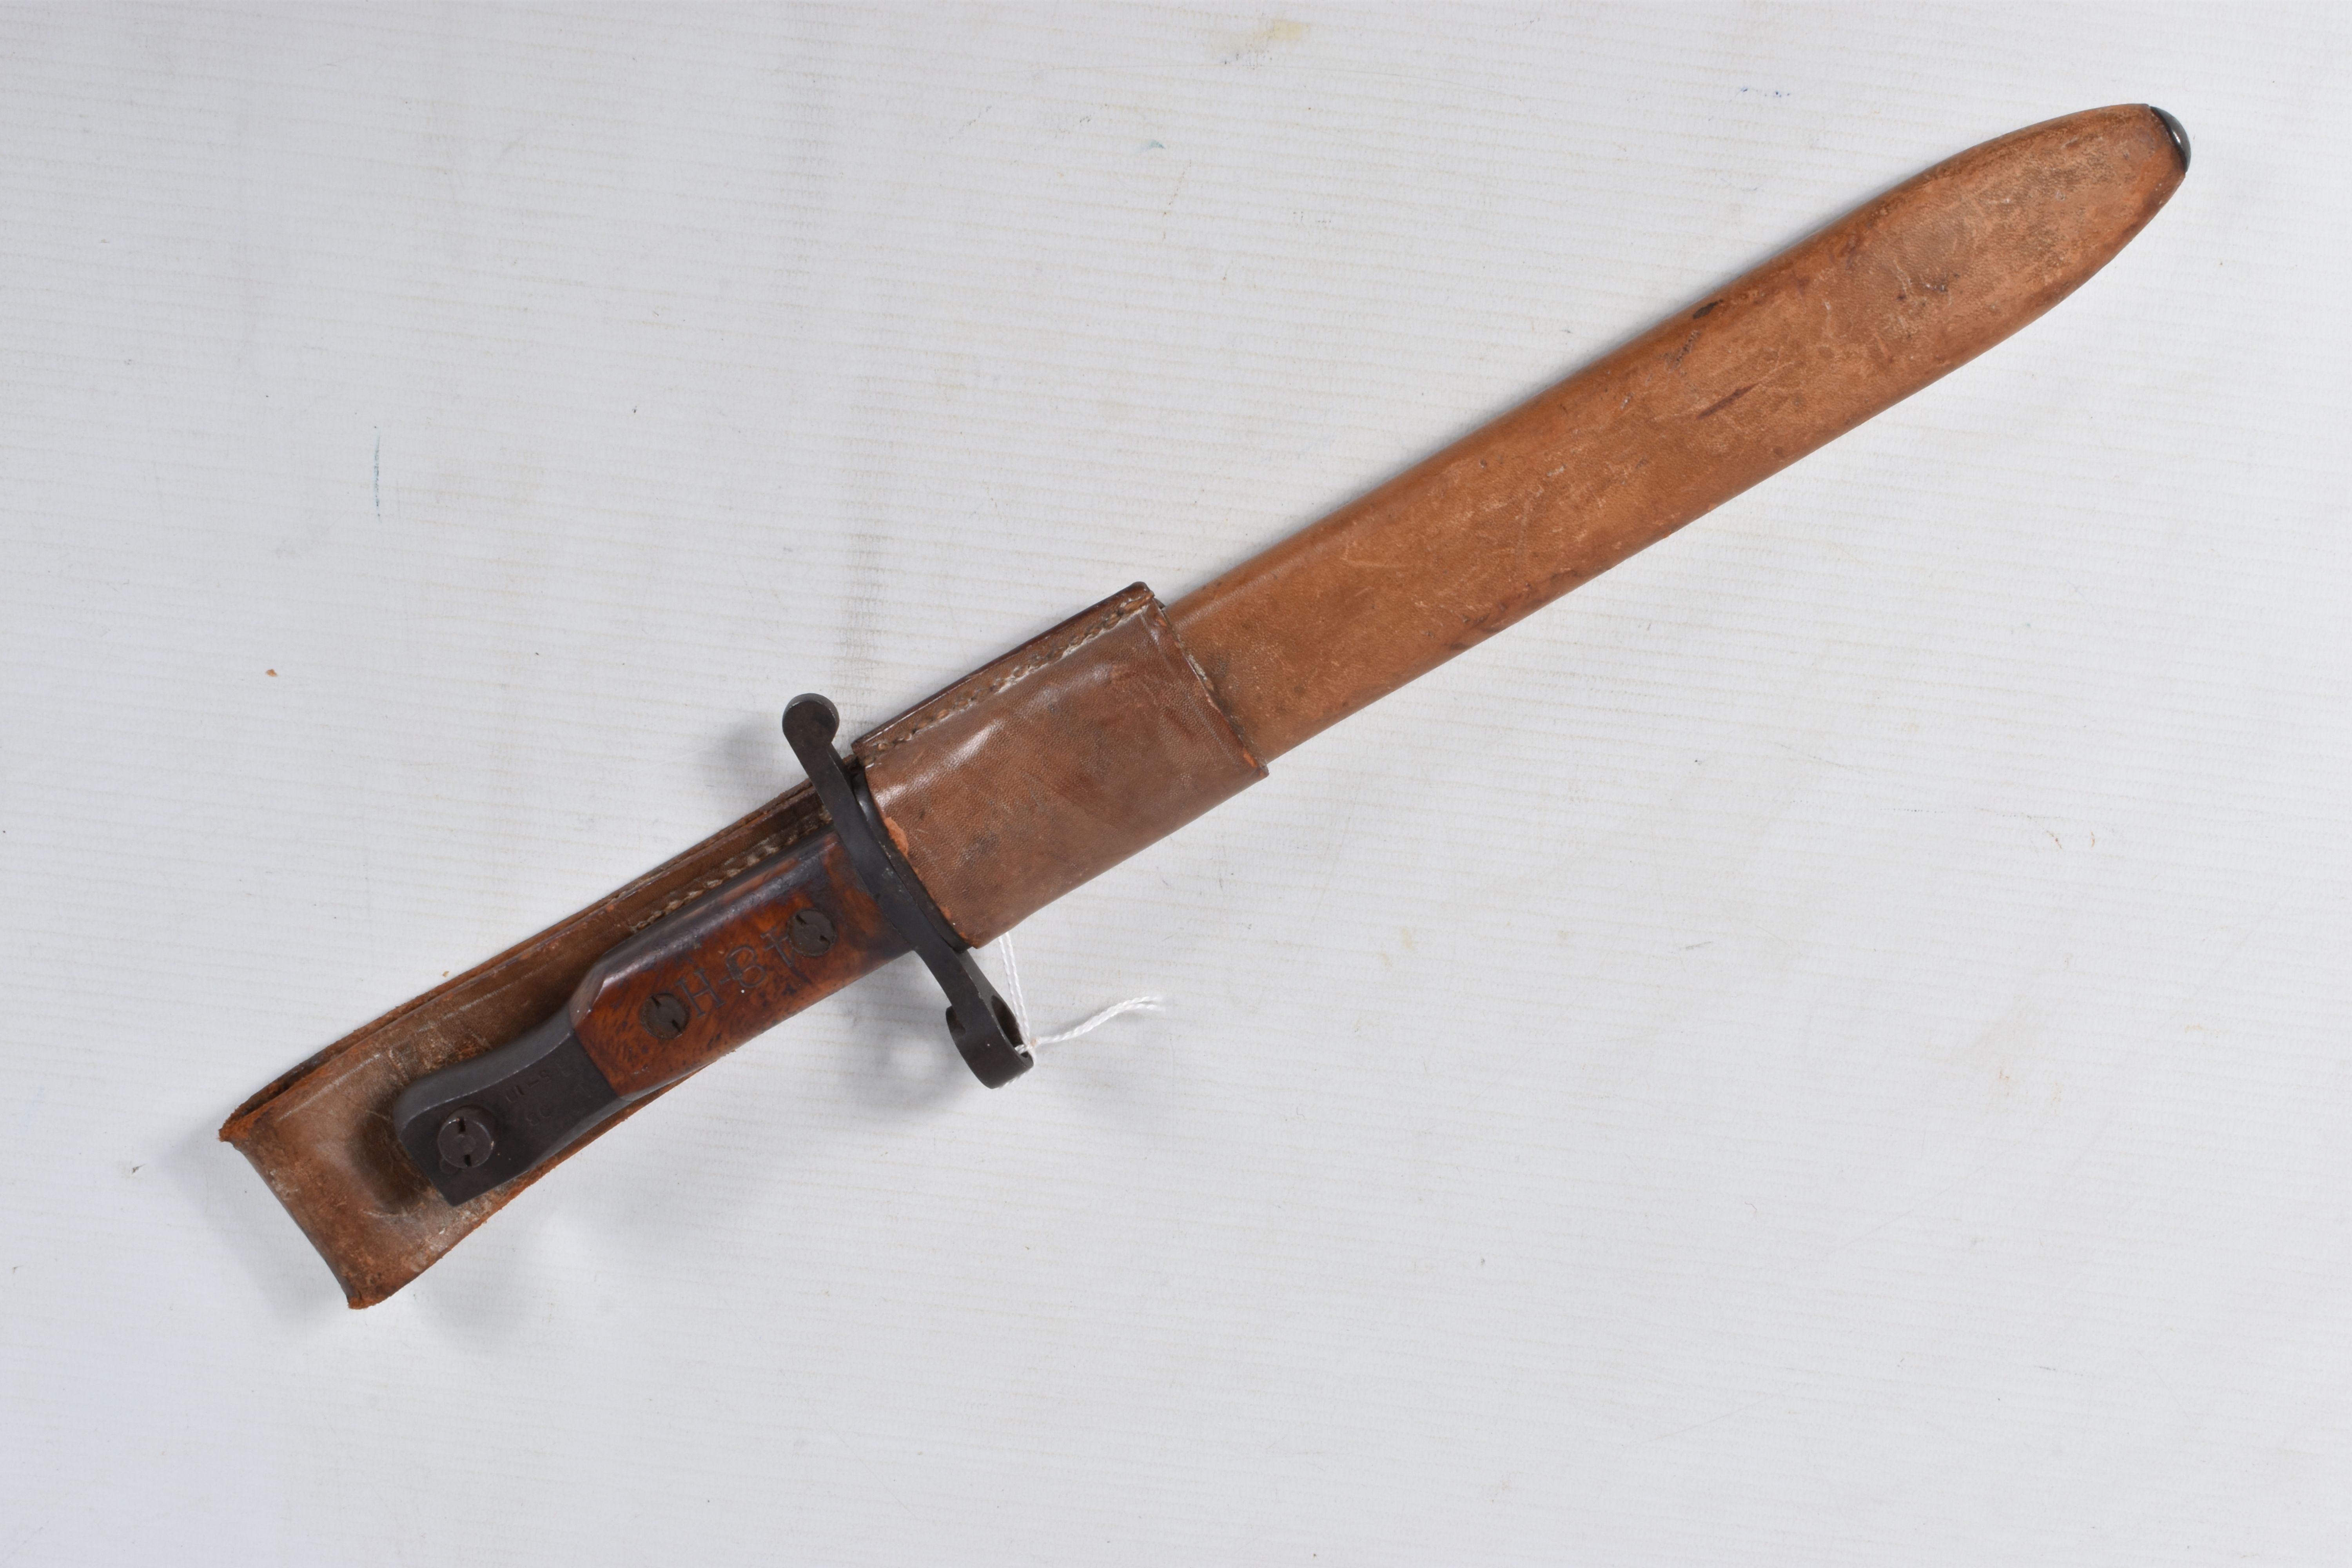 A 1907 PATTERN CANADIAN ROSS RIFLE BAYONET, the blade us unmarked but the handle has 48-H on one